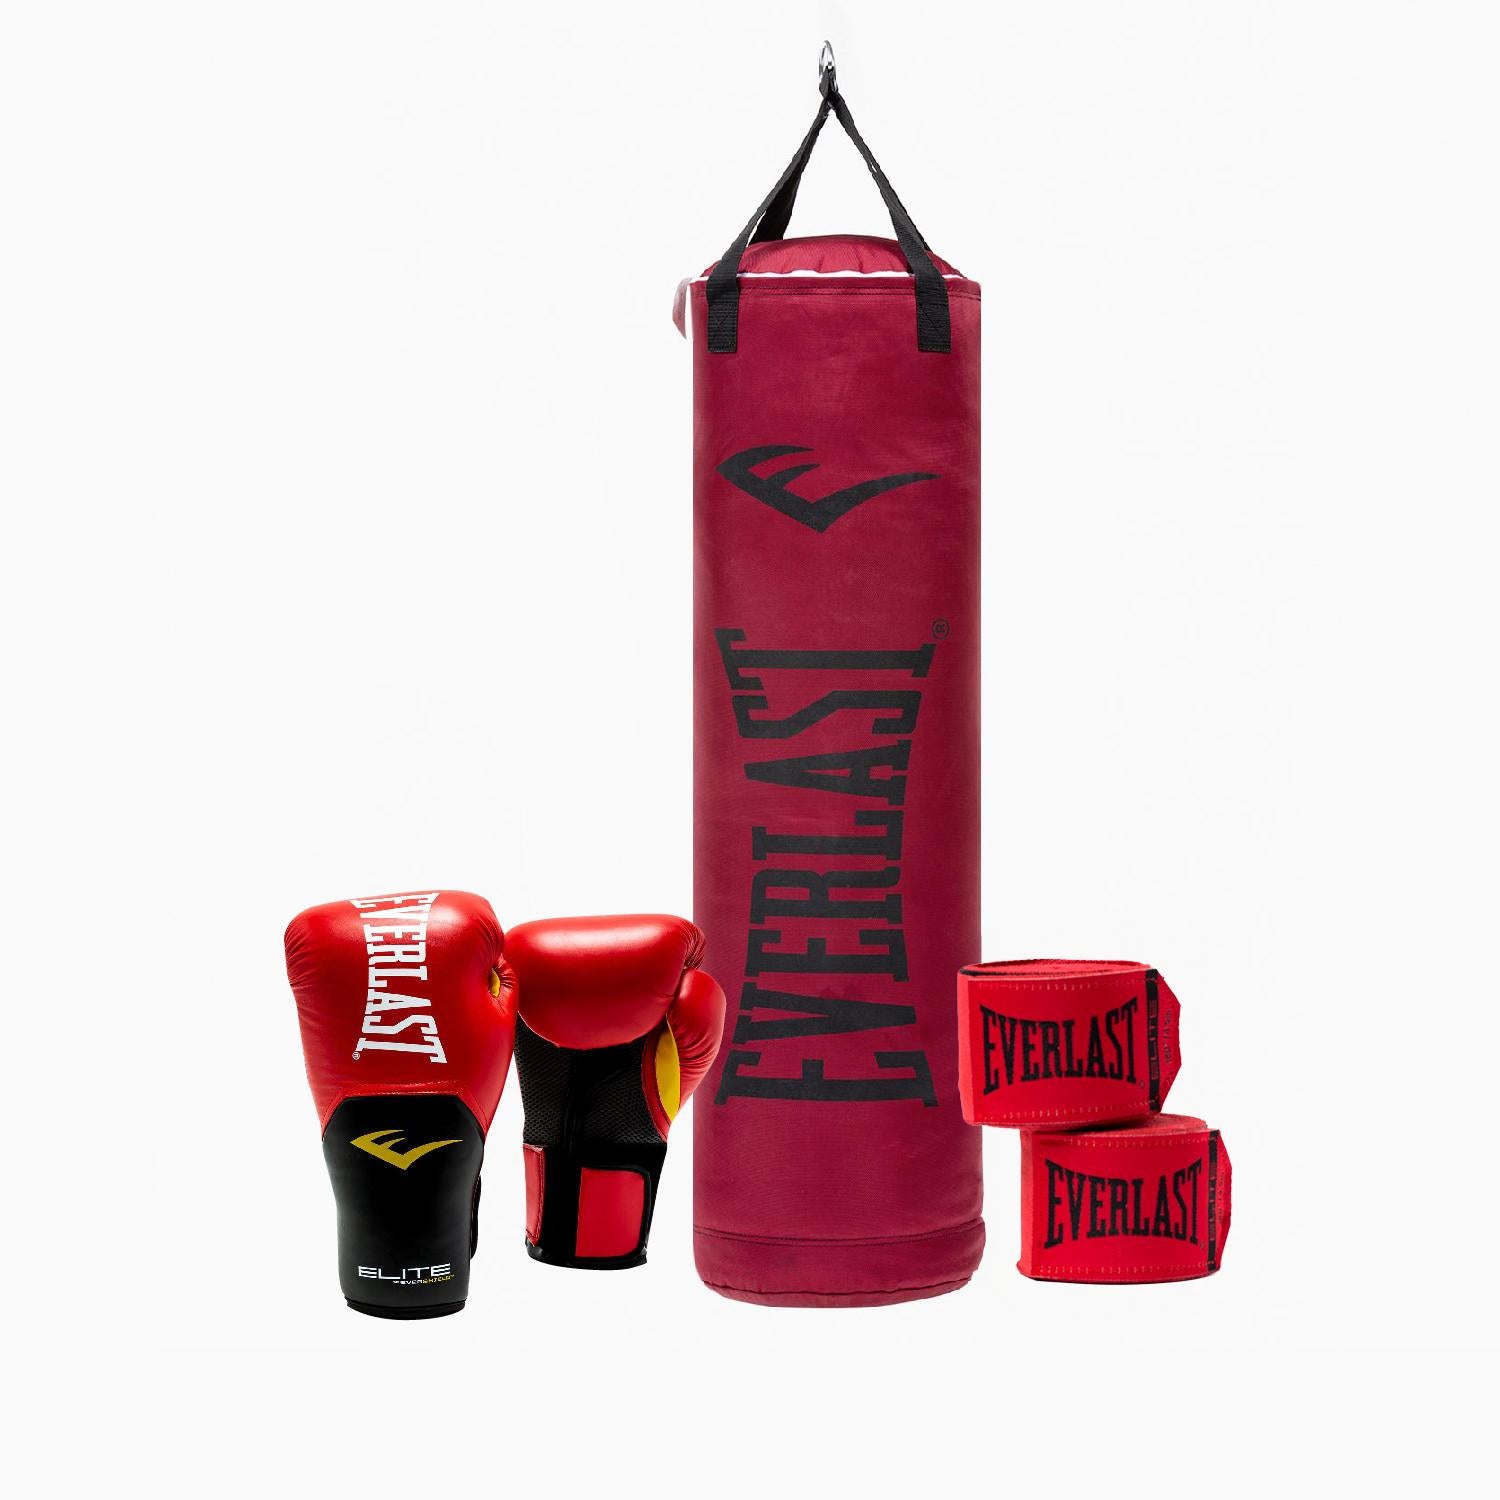 Pack Saco Boxeo Relleno + Guantes + Enganche